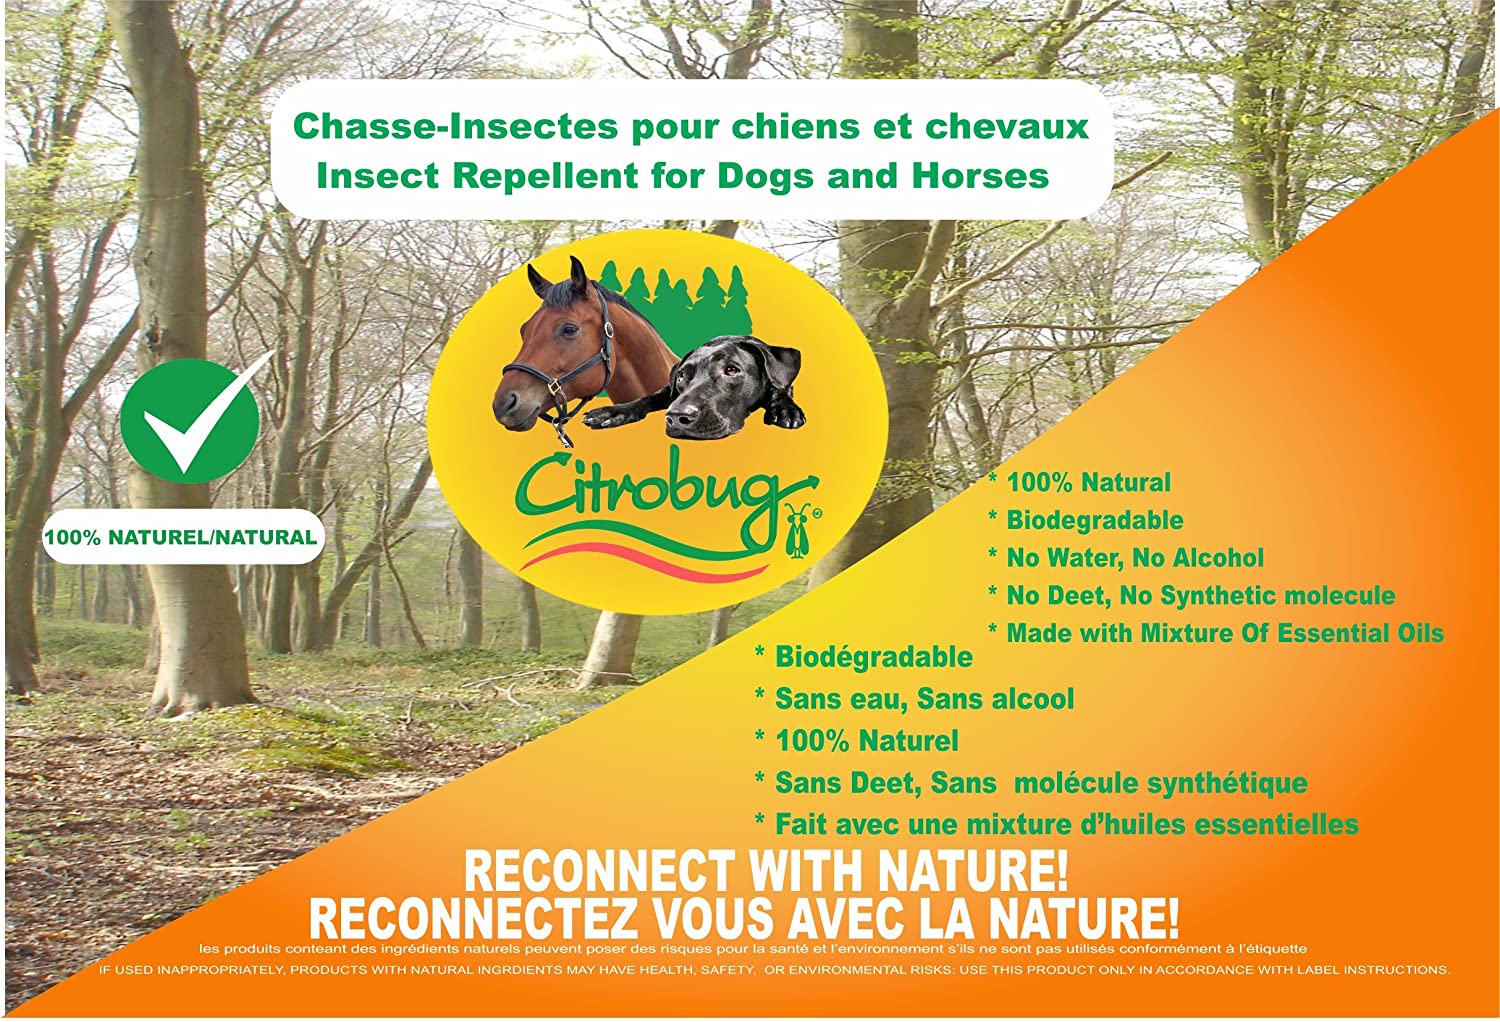 Citrobug - Insect Repellent For Dogs and Horses all things being eco chilliwack natural mosquito spray made in canada